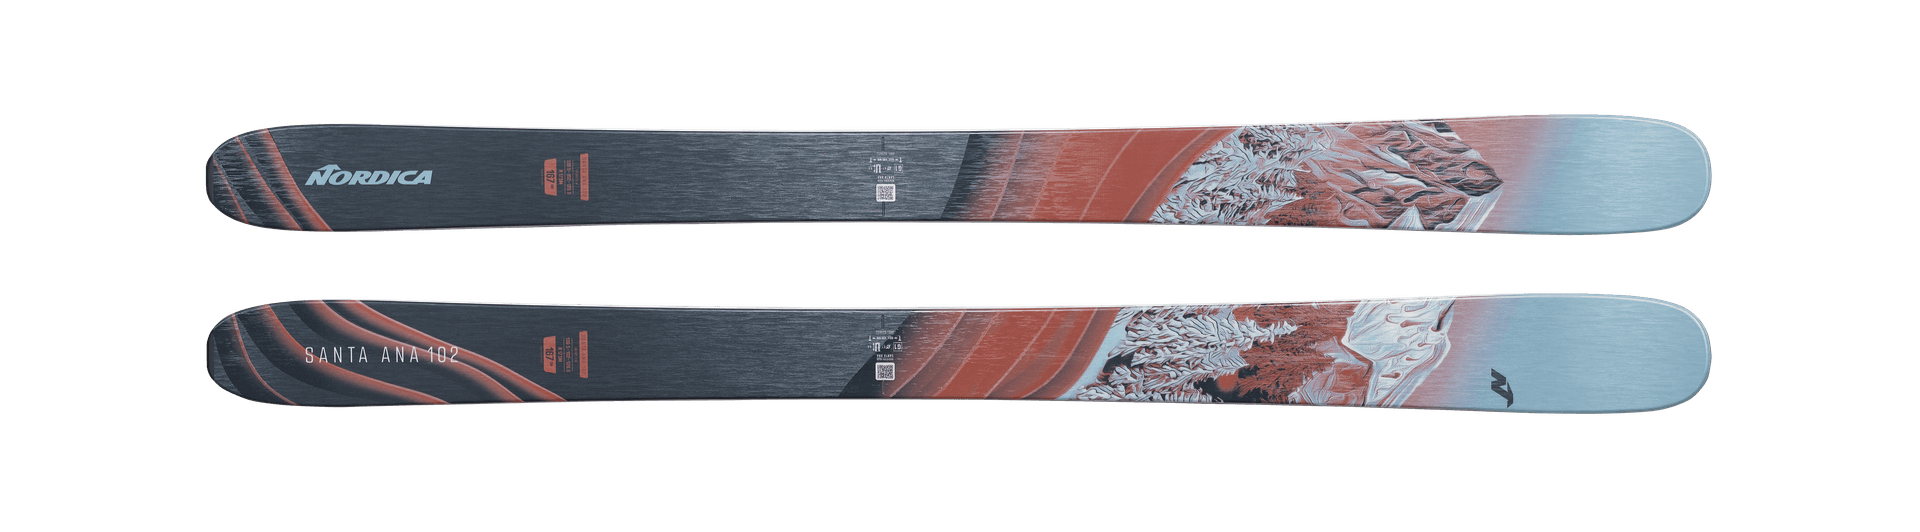 Picture of the Nordica Santa ana 102 skis.